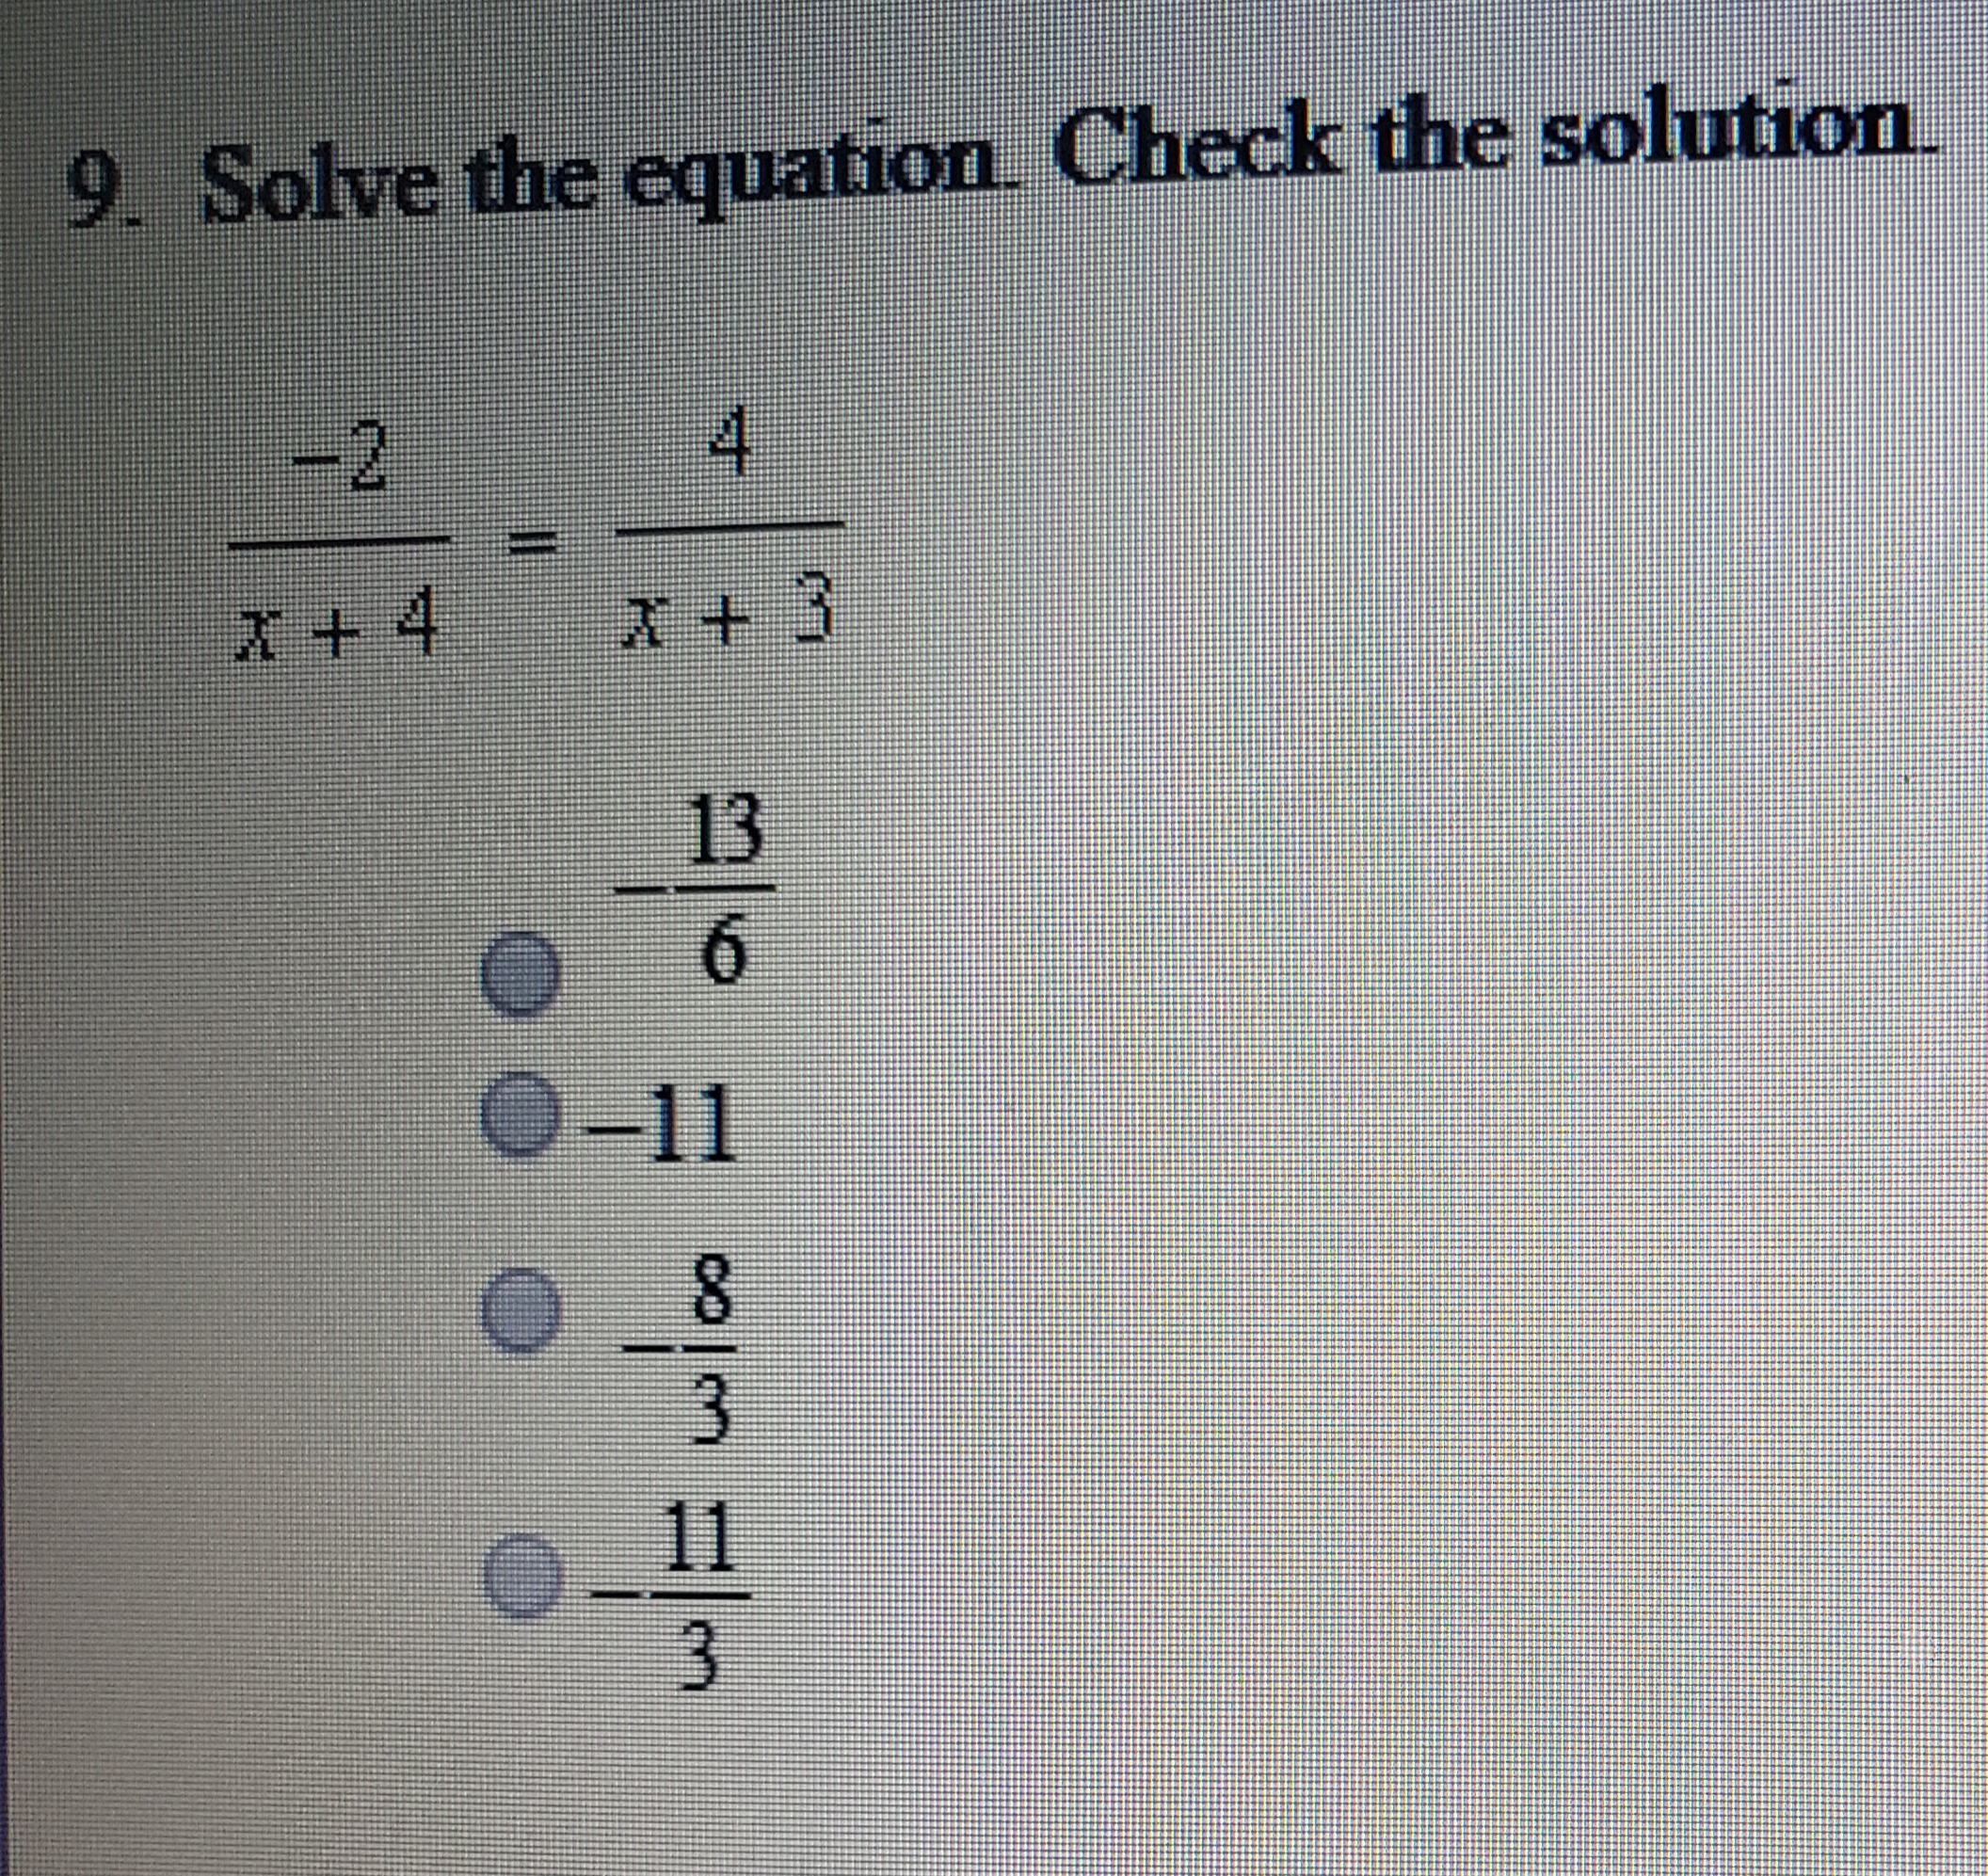 Solve the equation. Check the solution
-2
4.
x + 4
X +3
三D
